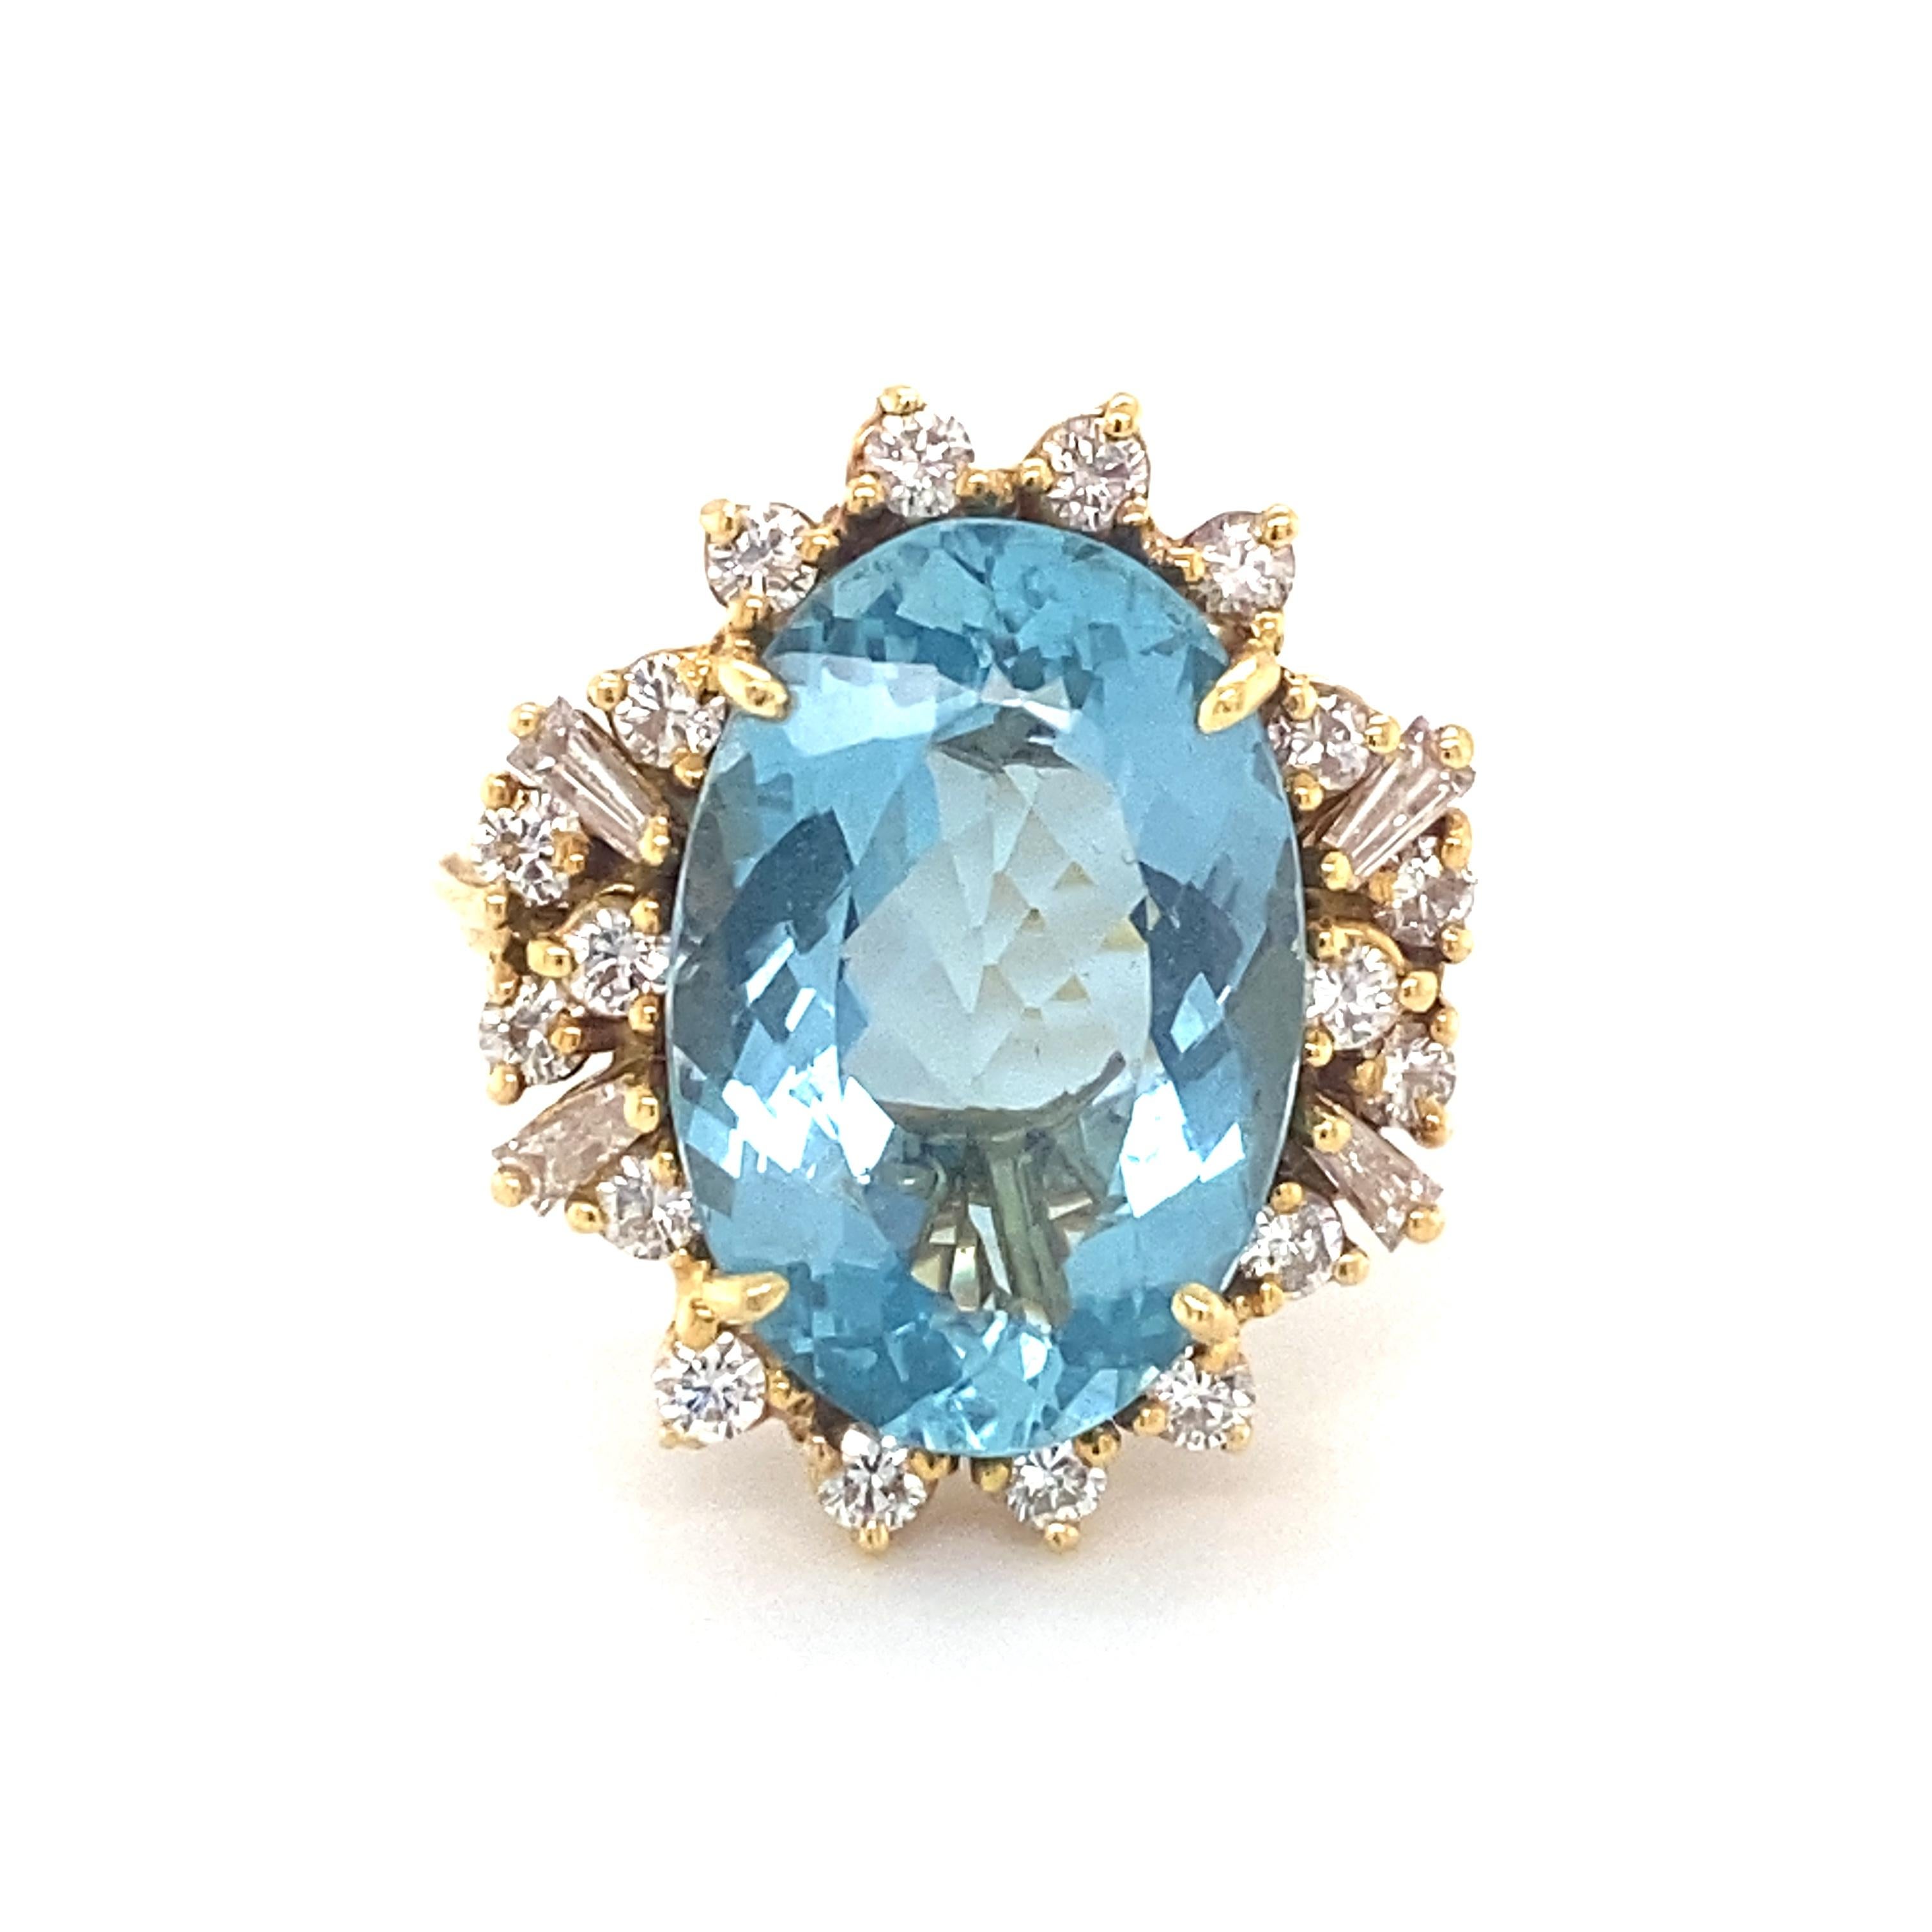 1970s 7.0 Carat Oval Aquamarine with Diamond Halo and 18 Karat Yellow Gold Ring. The Oval Cut Brilliant Aquamarine has a clear Blue color. It is surrounded by a .5 carat total weight Halo of Round Brilliant and Baguette Diamonds. This stunning ring